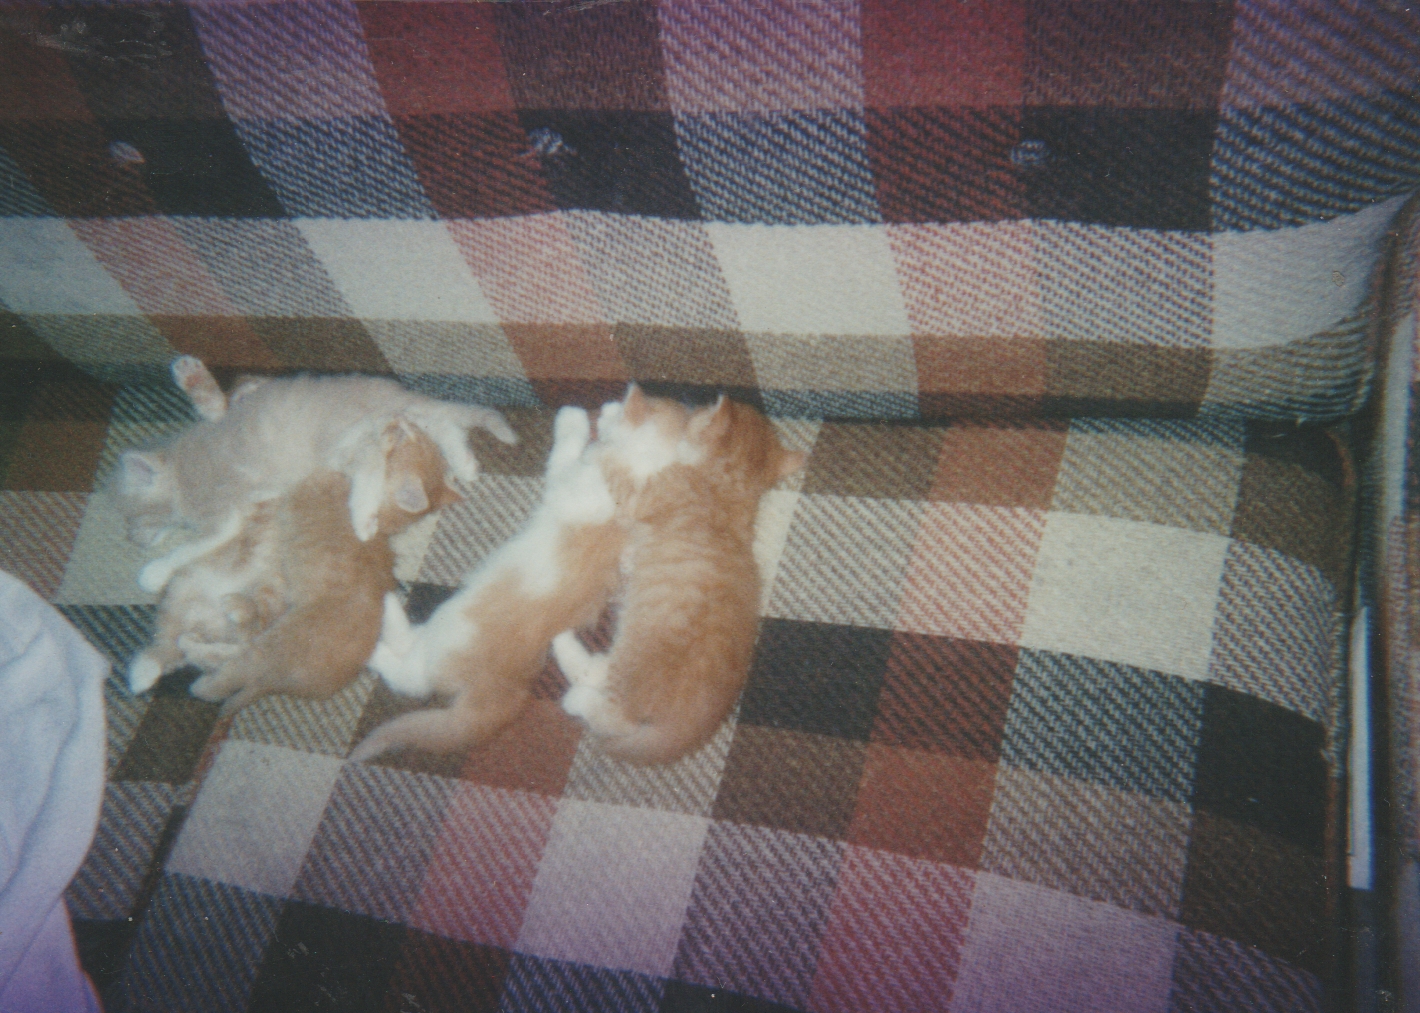 1999 maybe - Honey Cat kittens on the couch.jpg